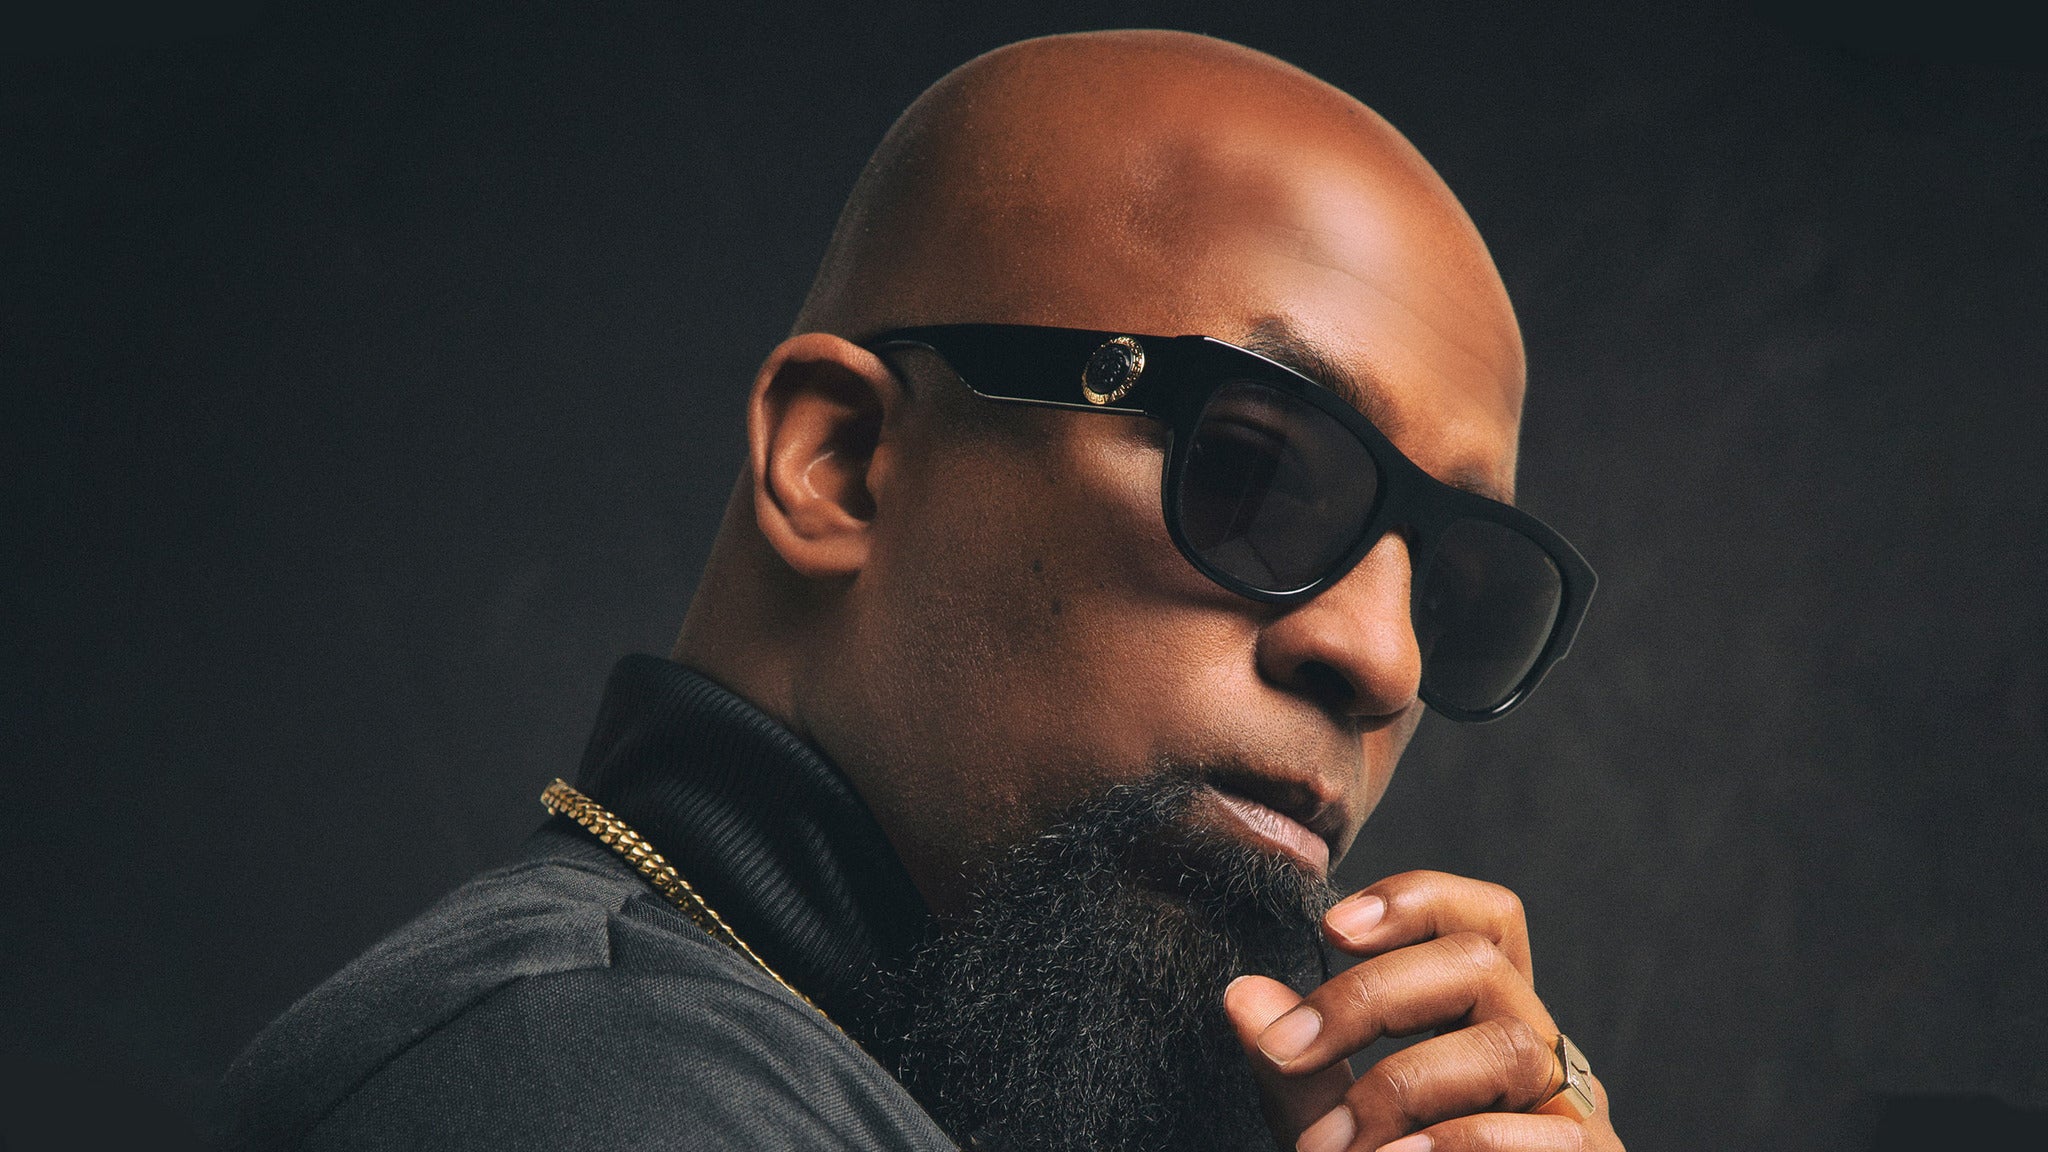 TECH N9NE's Strange New World Tour 2021 presale password for early tickets in New Orleans